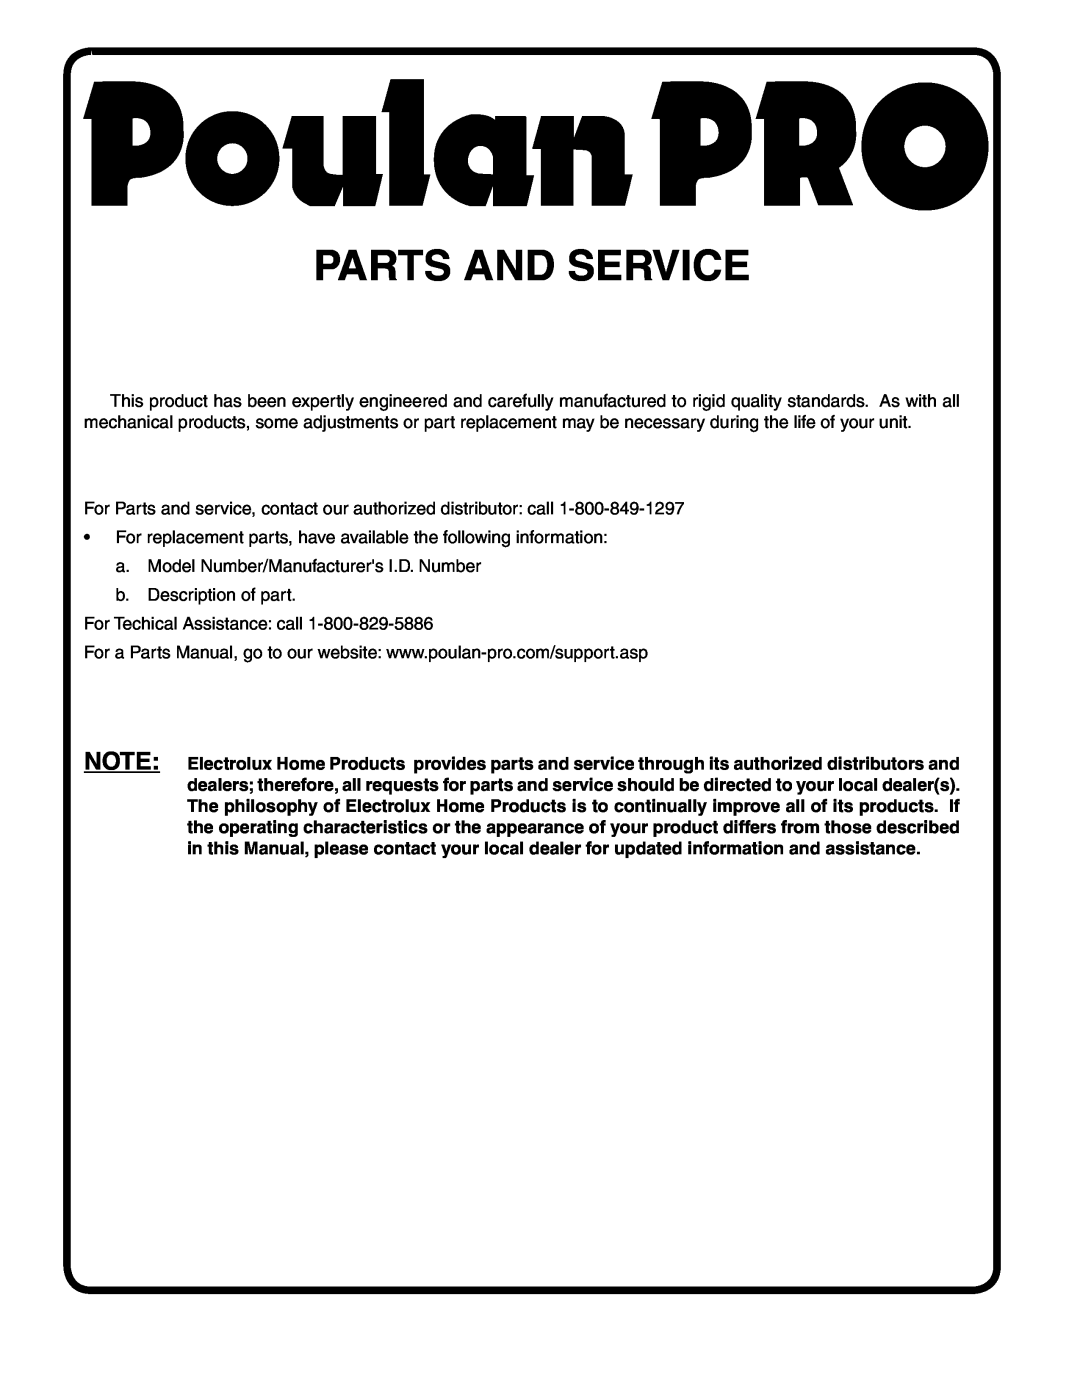 Poulan 96012004600, 401115 manual Parts And Service 